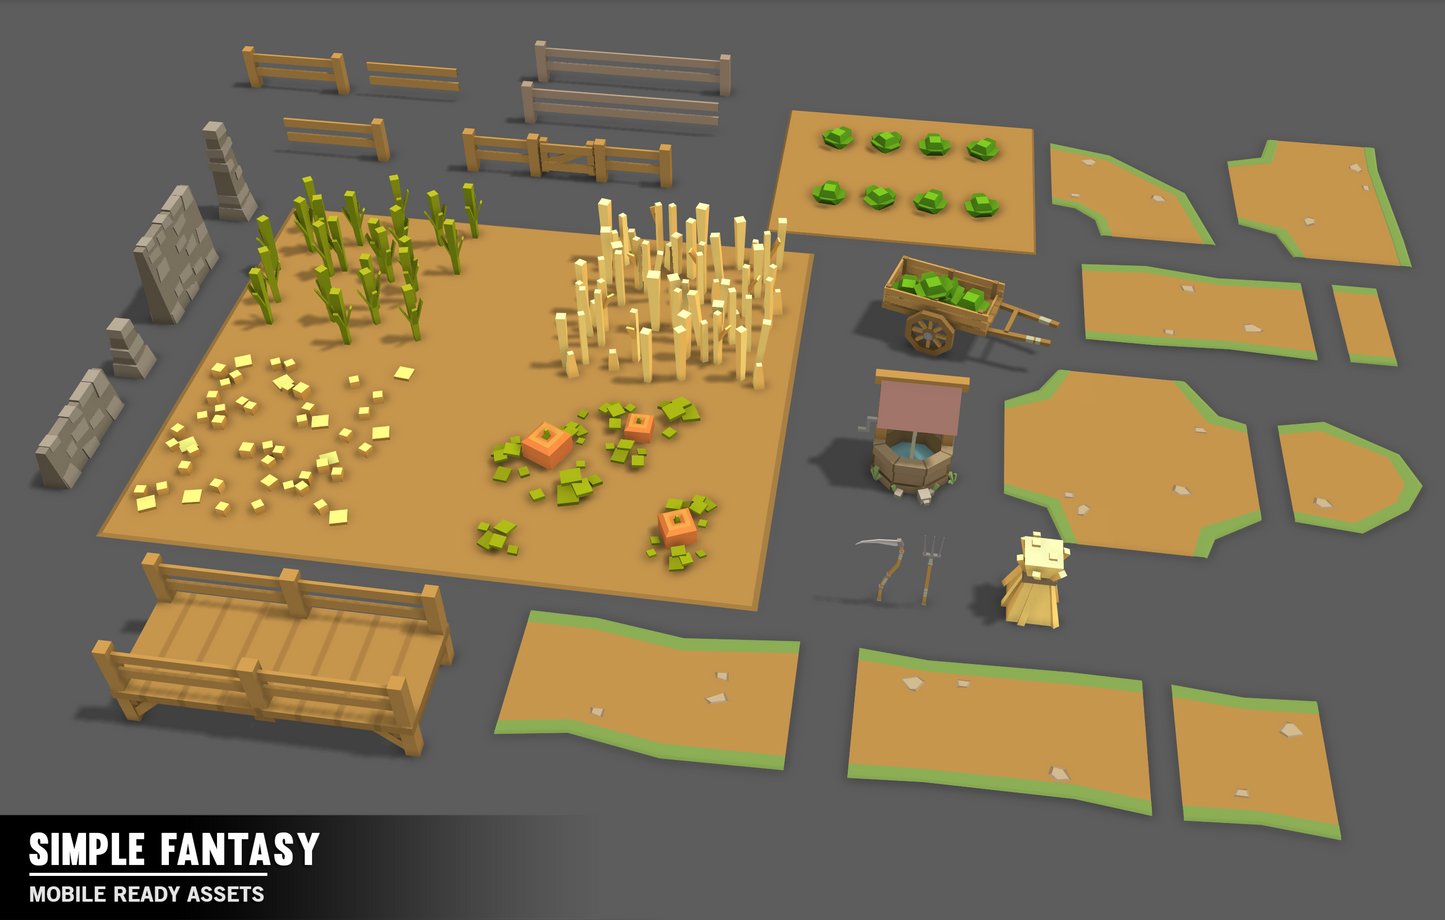 Simple Fantasy low poly farm assets for game developers